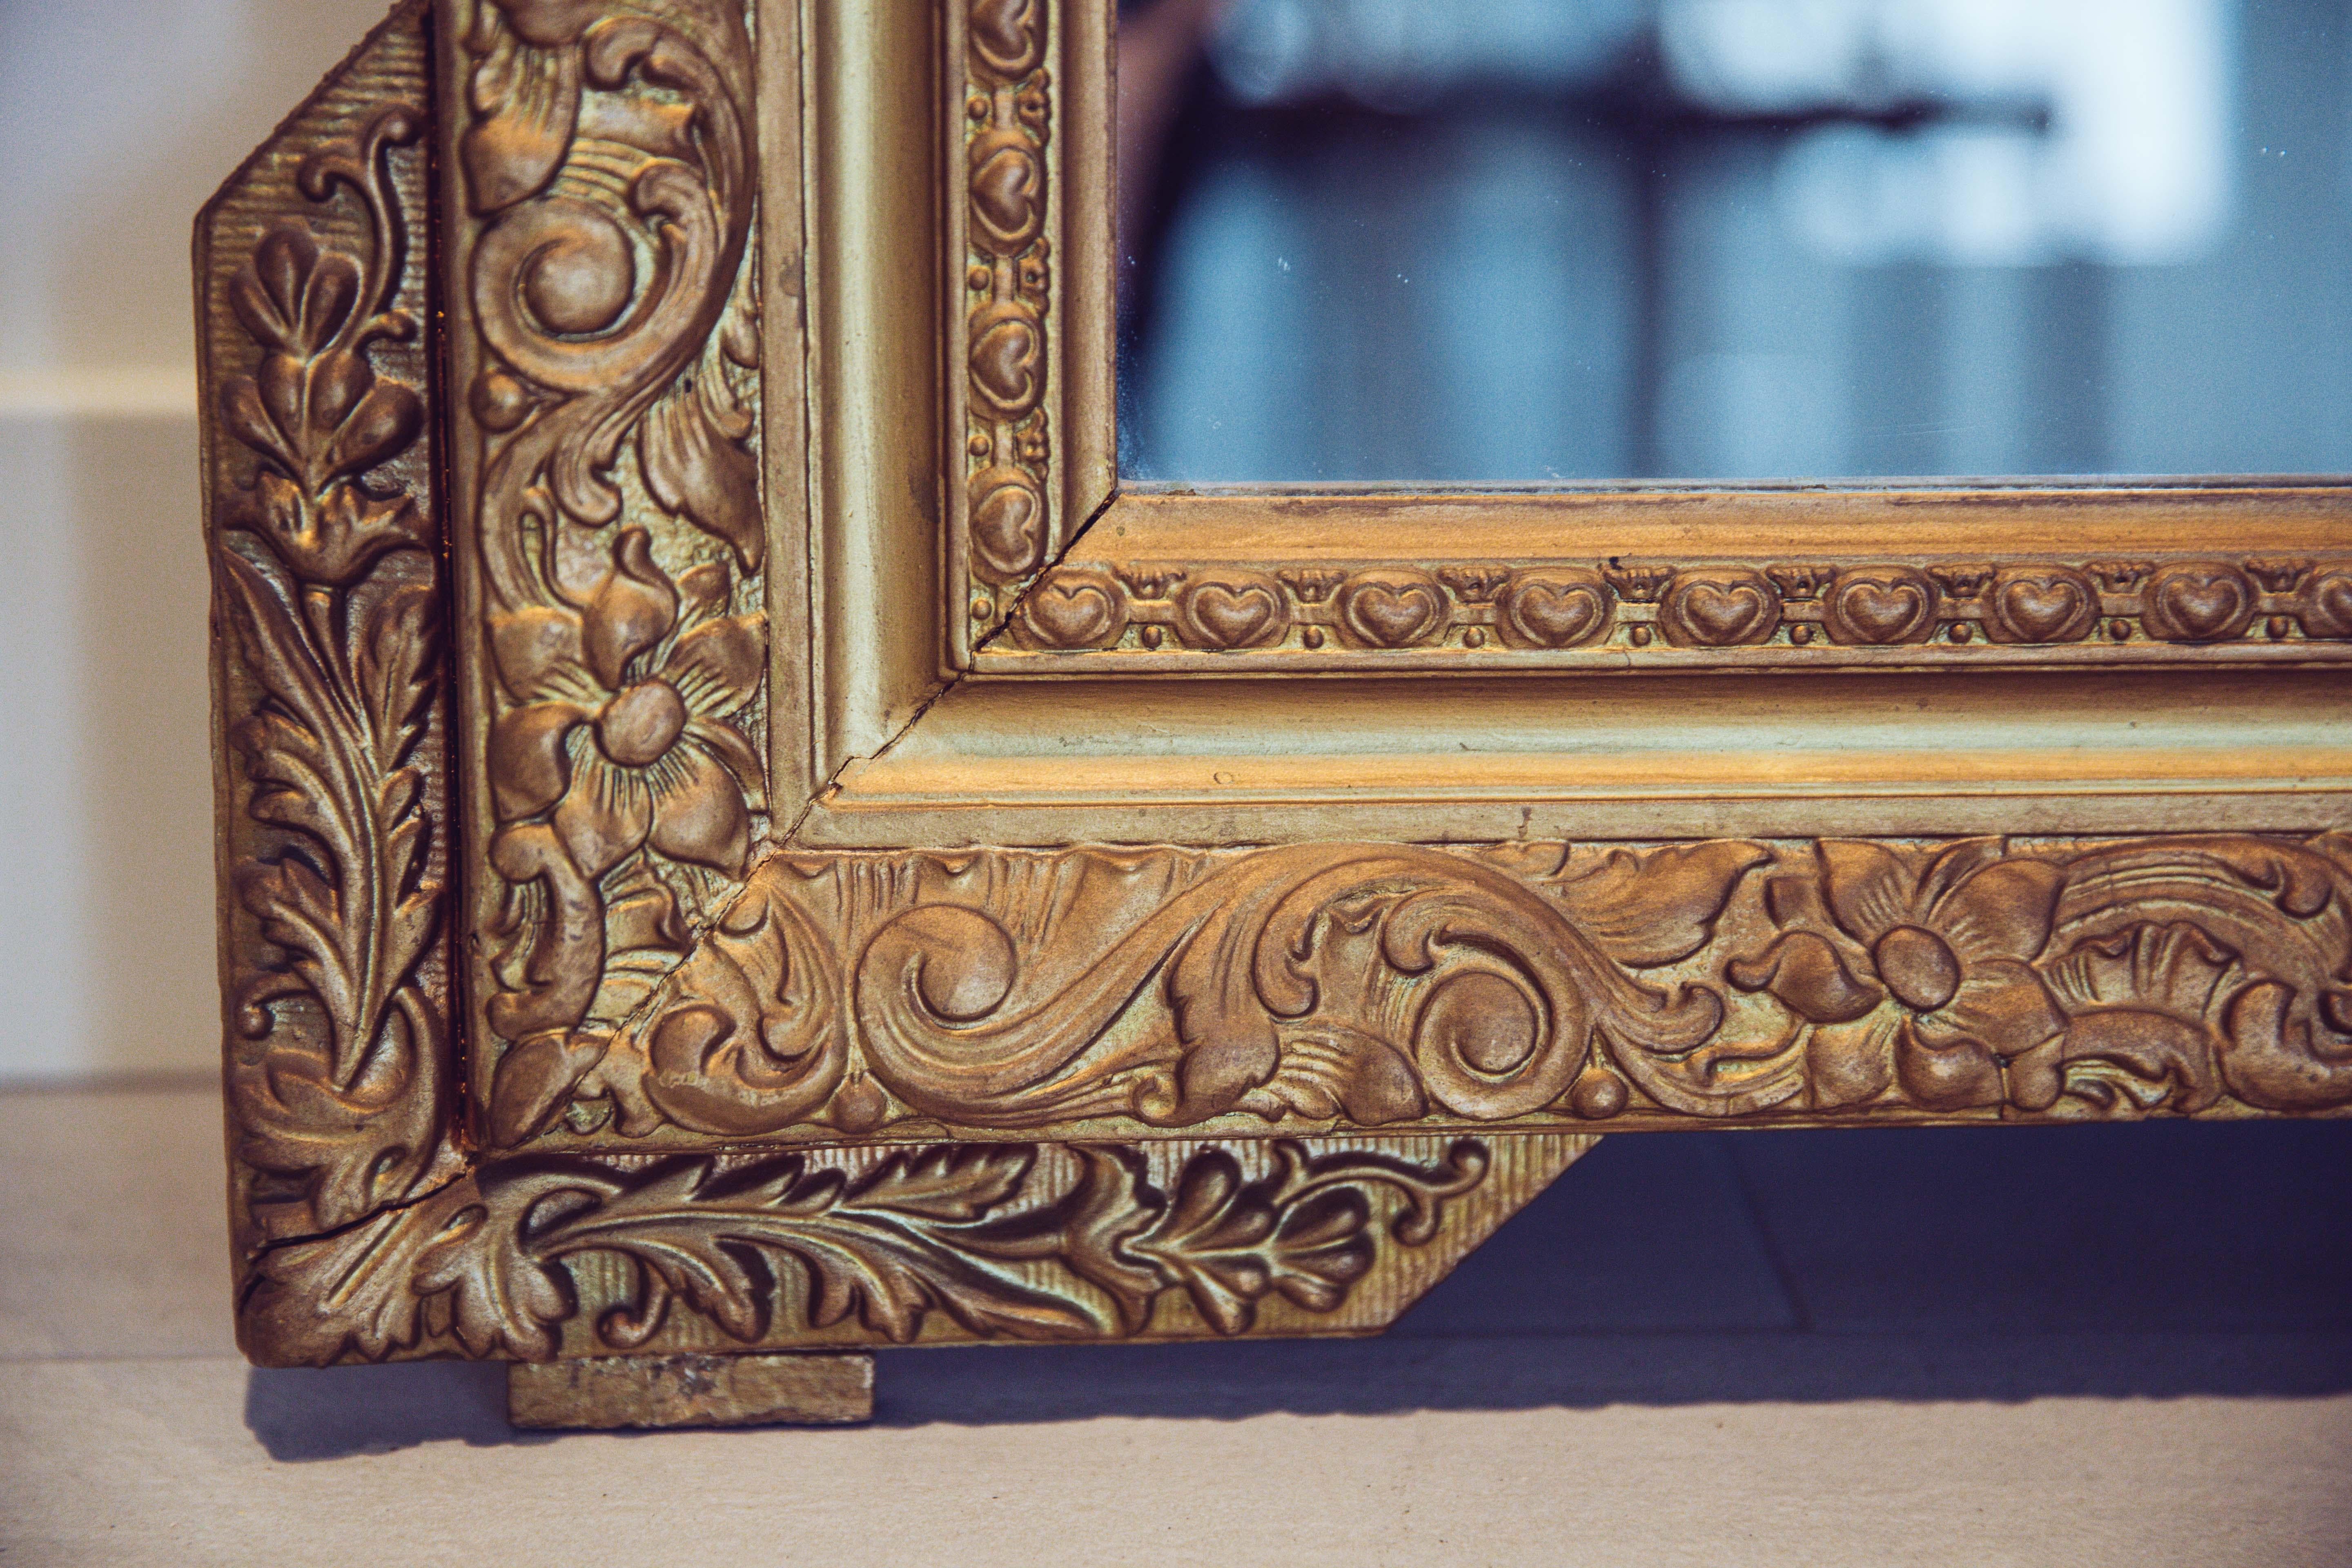 19th Century French Carved Gilded Wood Mirror with Urn Motif Crest For Sale 3